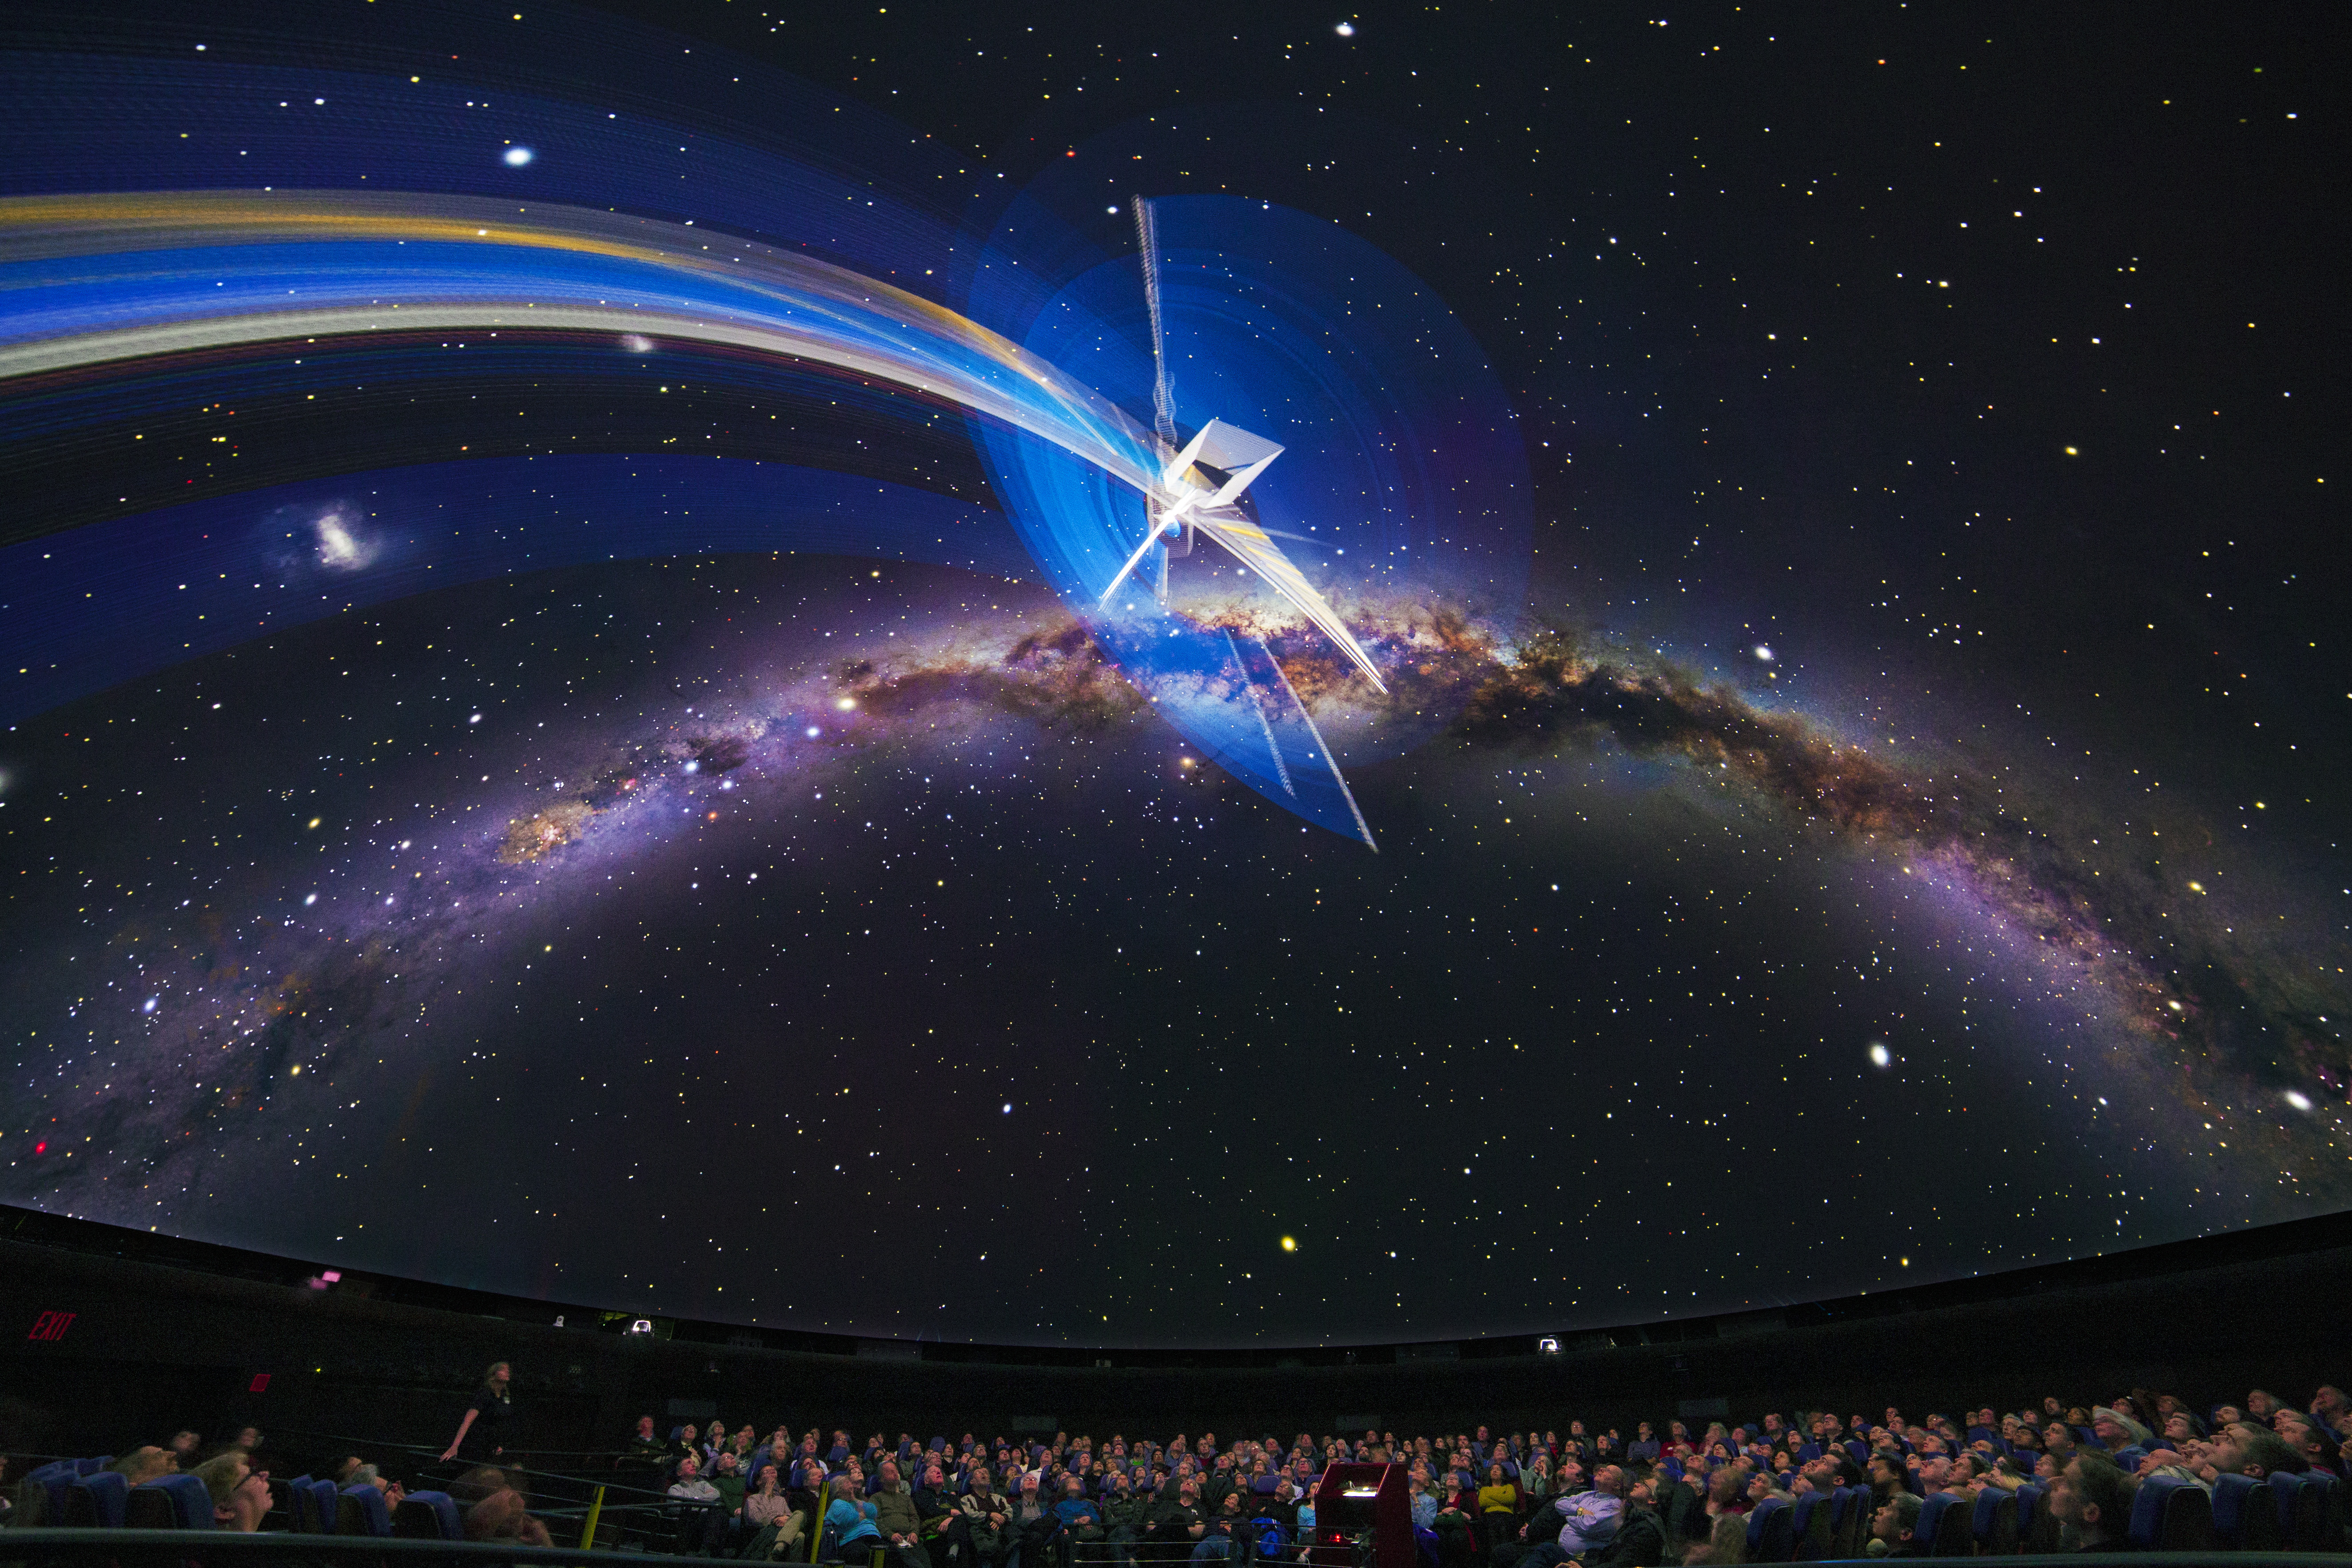 Hayden Planetarium Unveils New Laser Projection System as Part of Apollo  Moon Landing Anniversary Tribute - Boxoffice